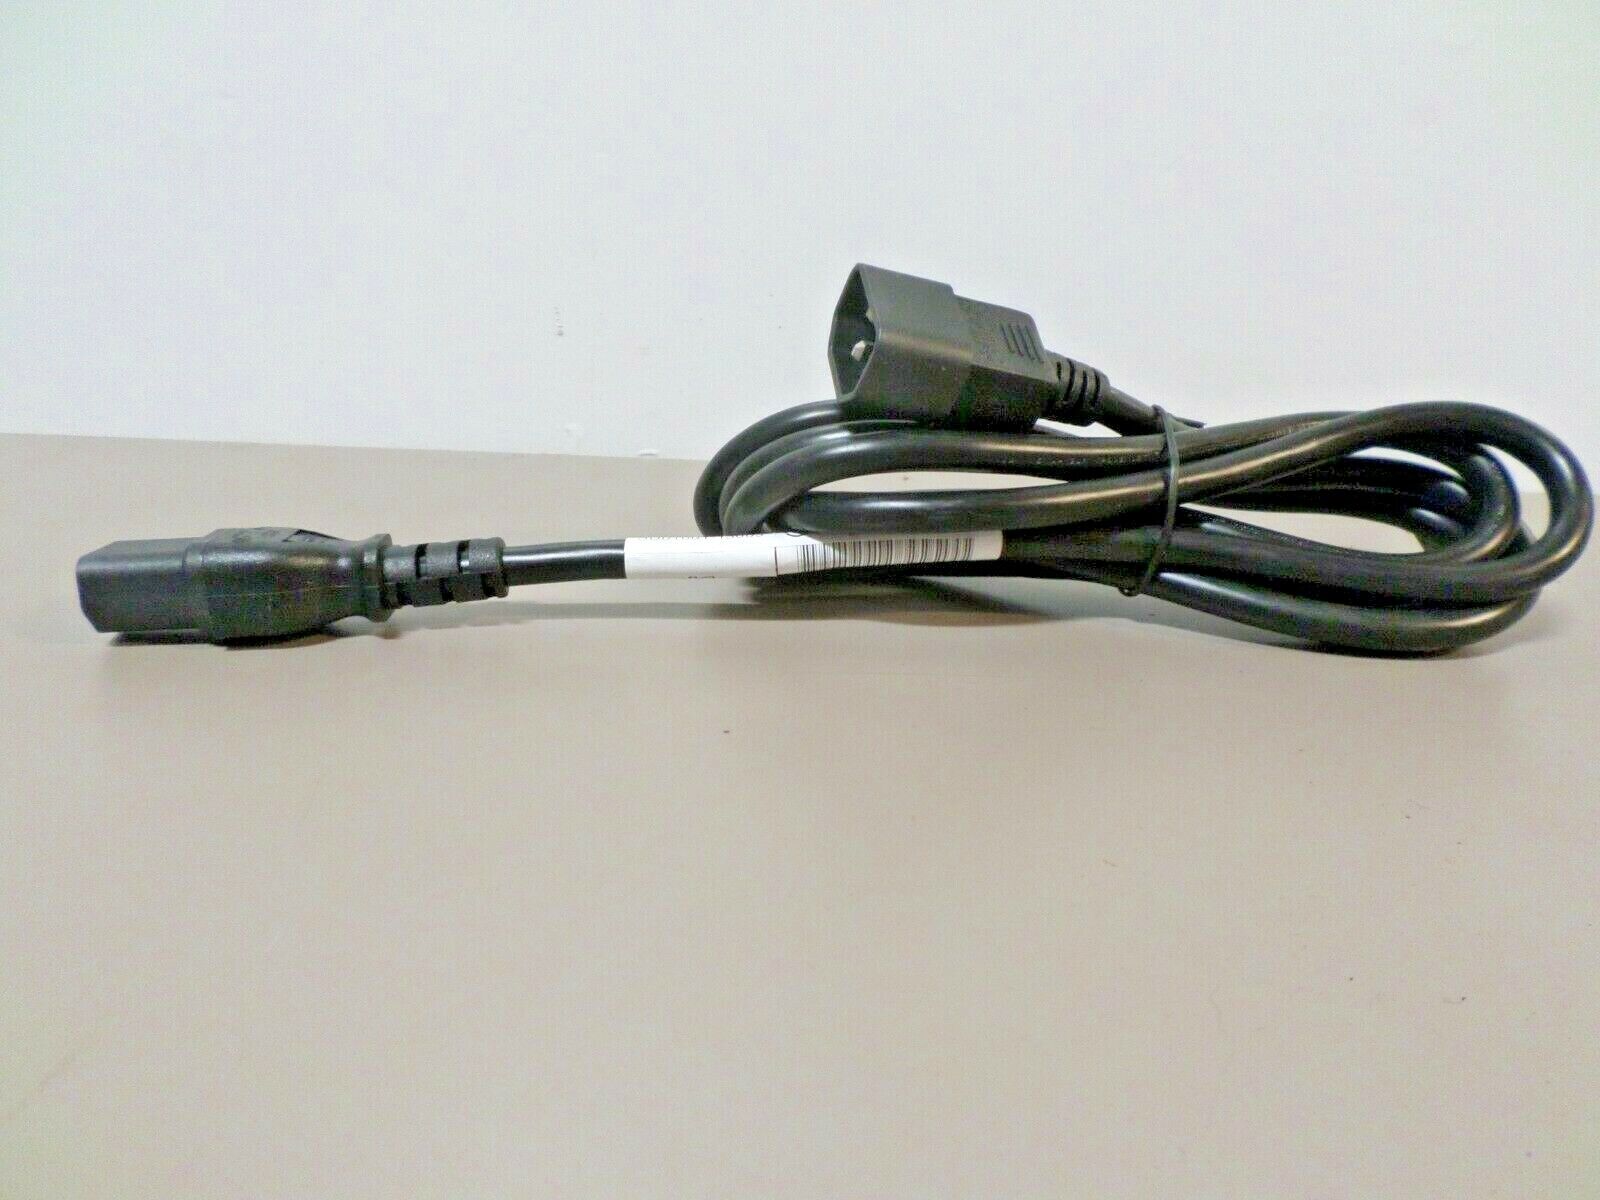 6-Foot LONGWELL SJT 152192 Computer Power Cable Extension Cord SU01001-13003